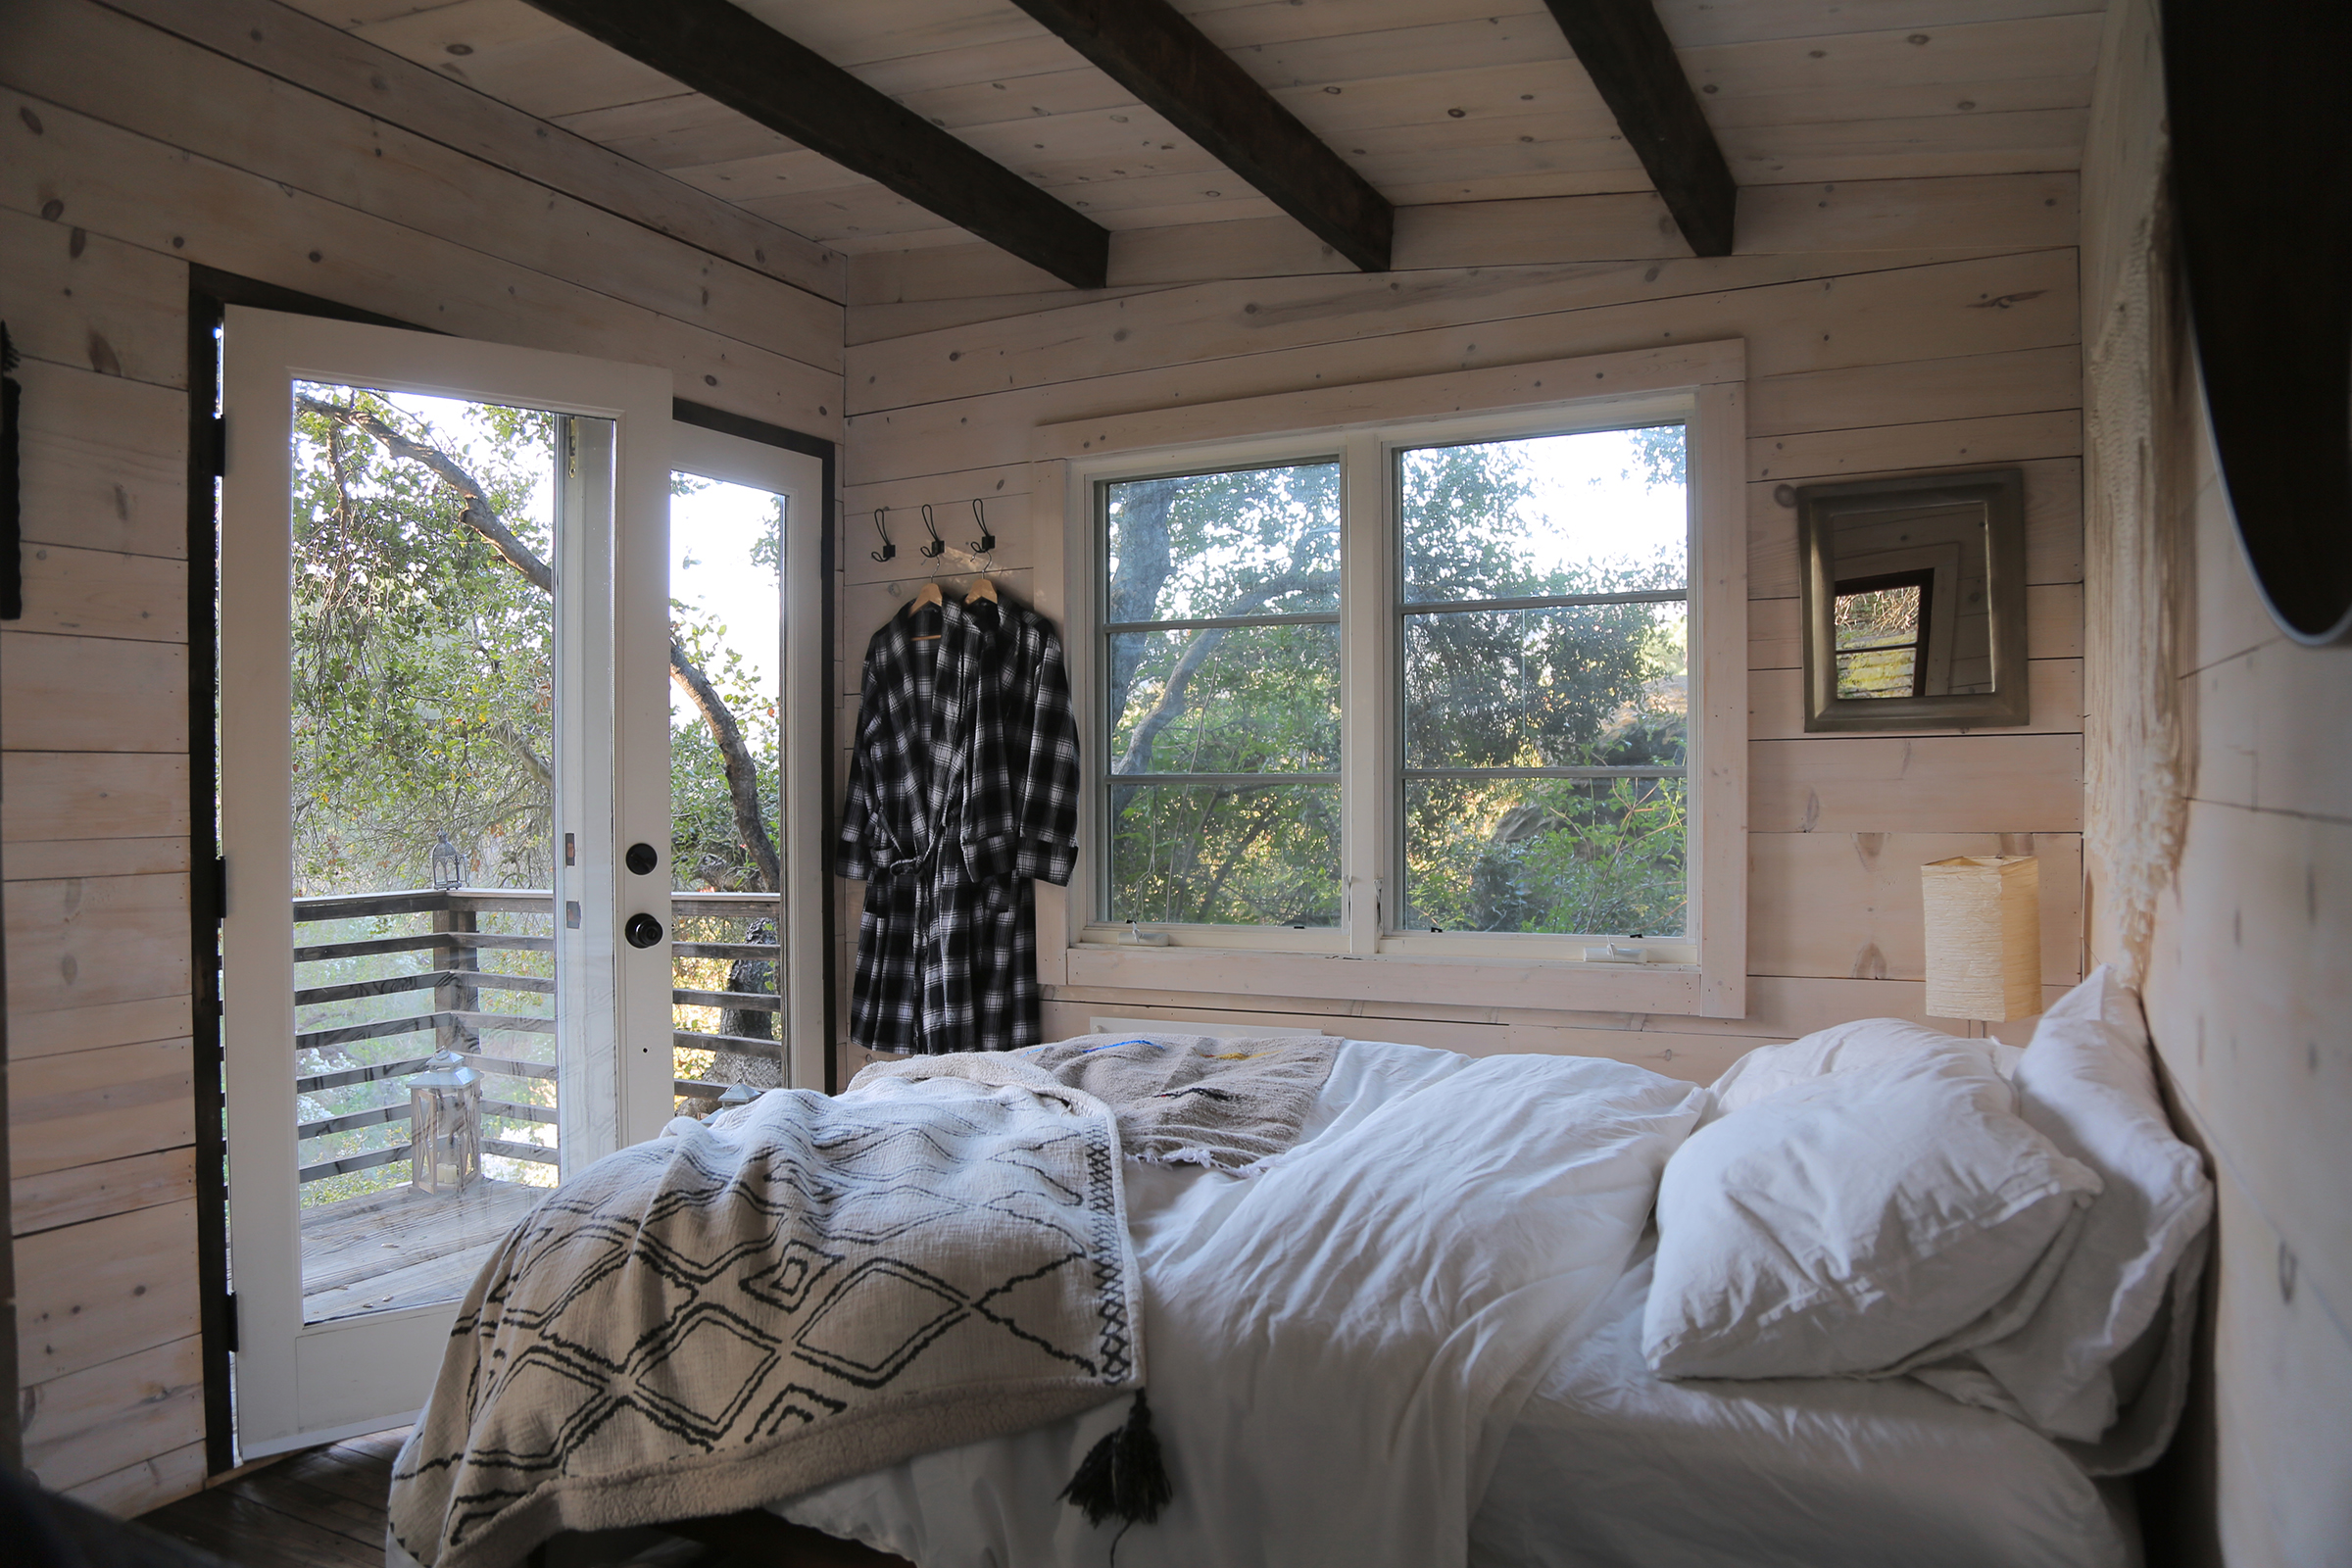 A bedroom at the Topanga Treehouse in California.